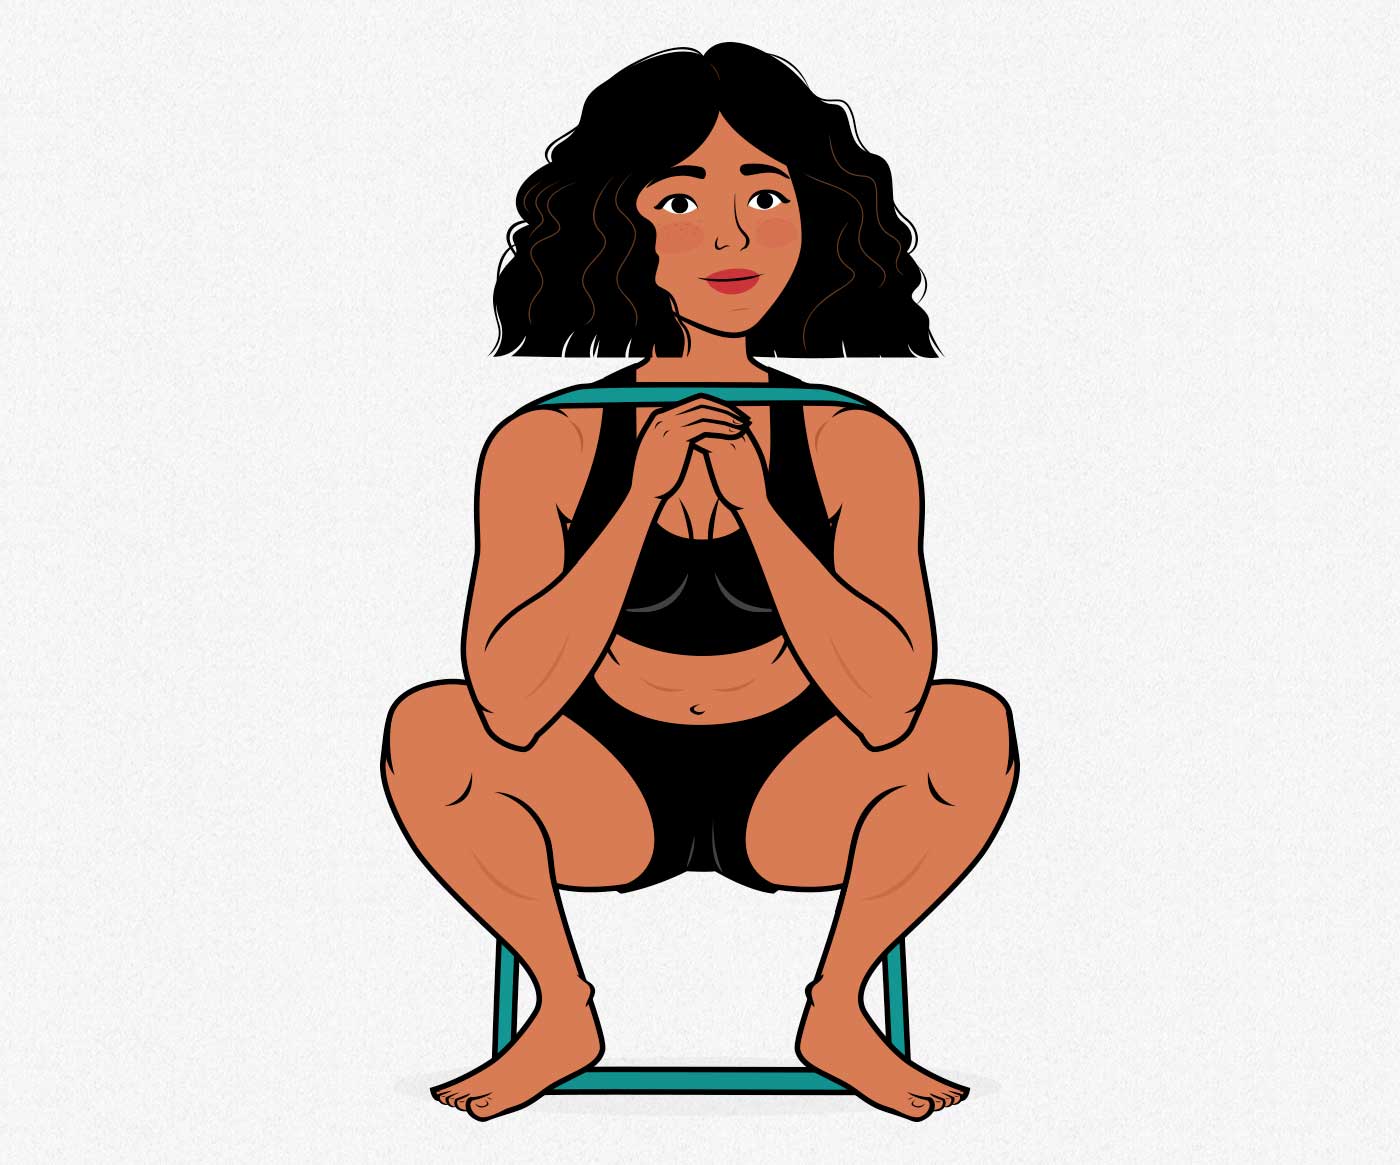 Illustration of a woman squatting with  resistance bands to gain muscle and strength.